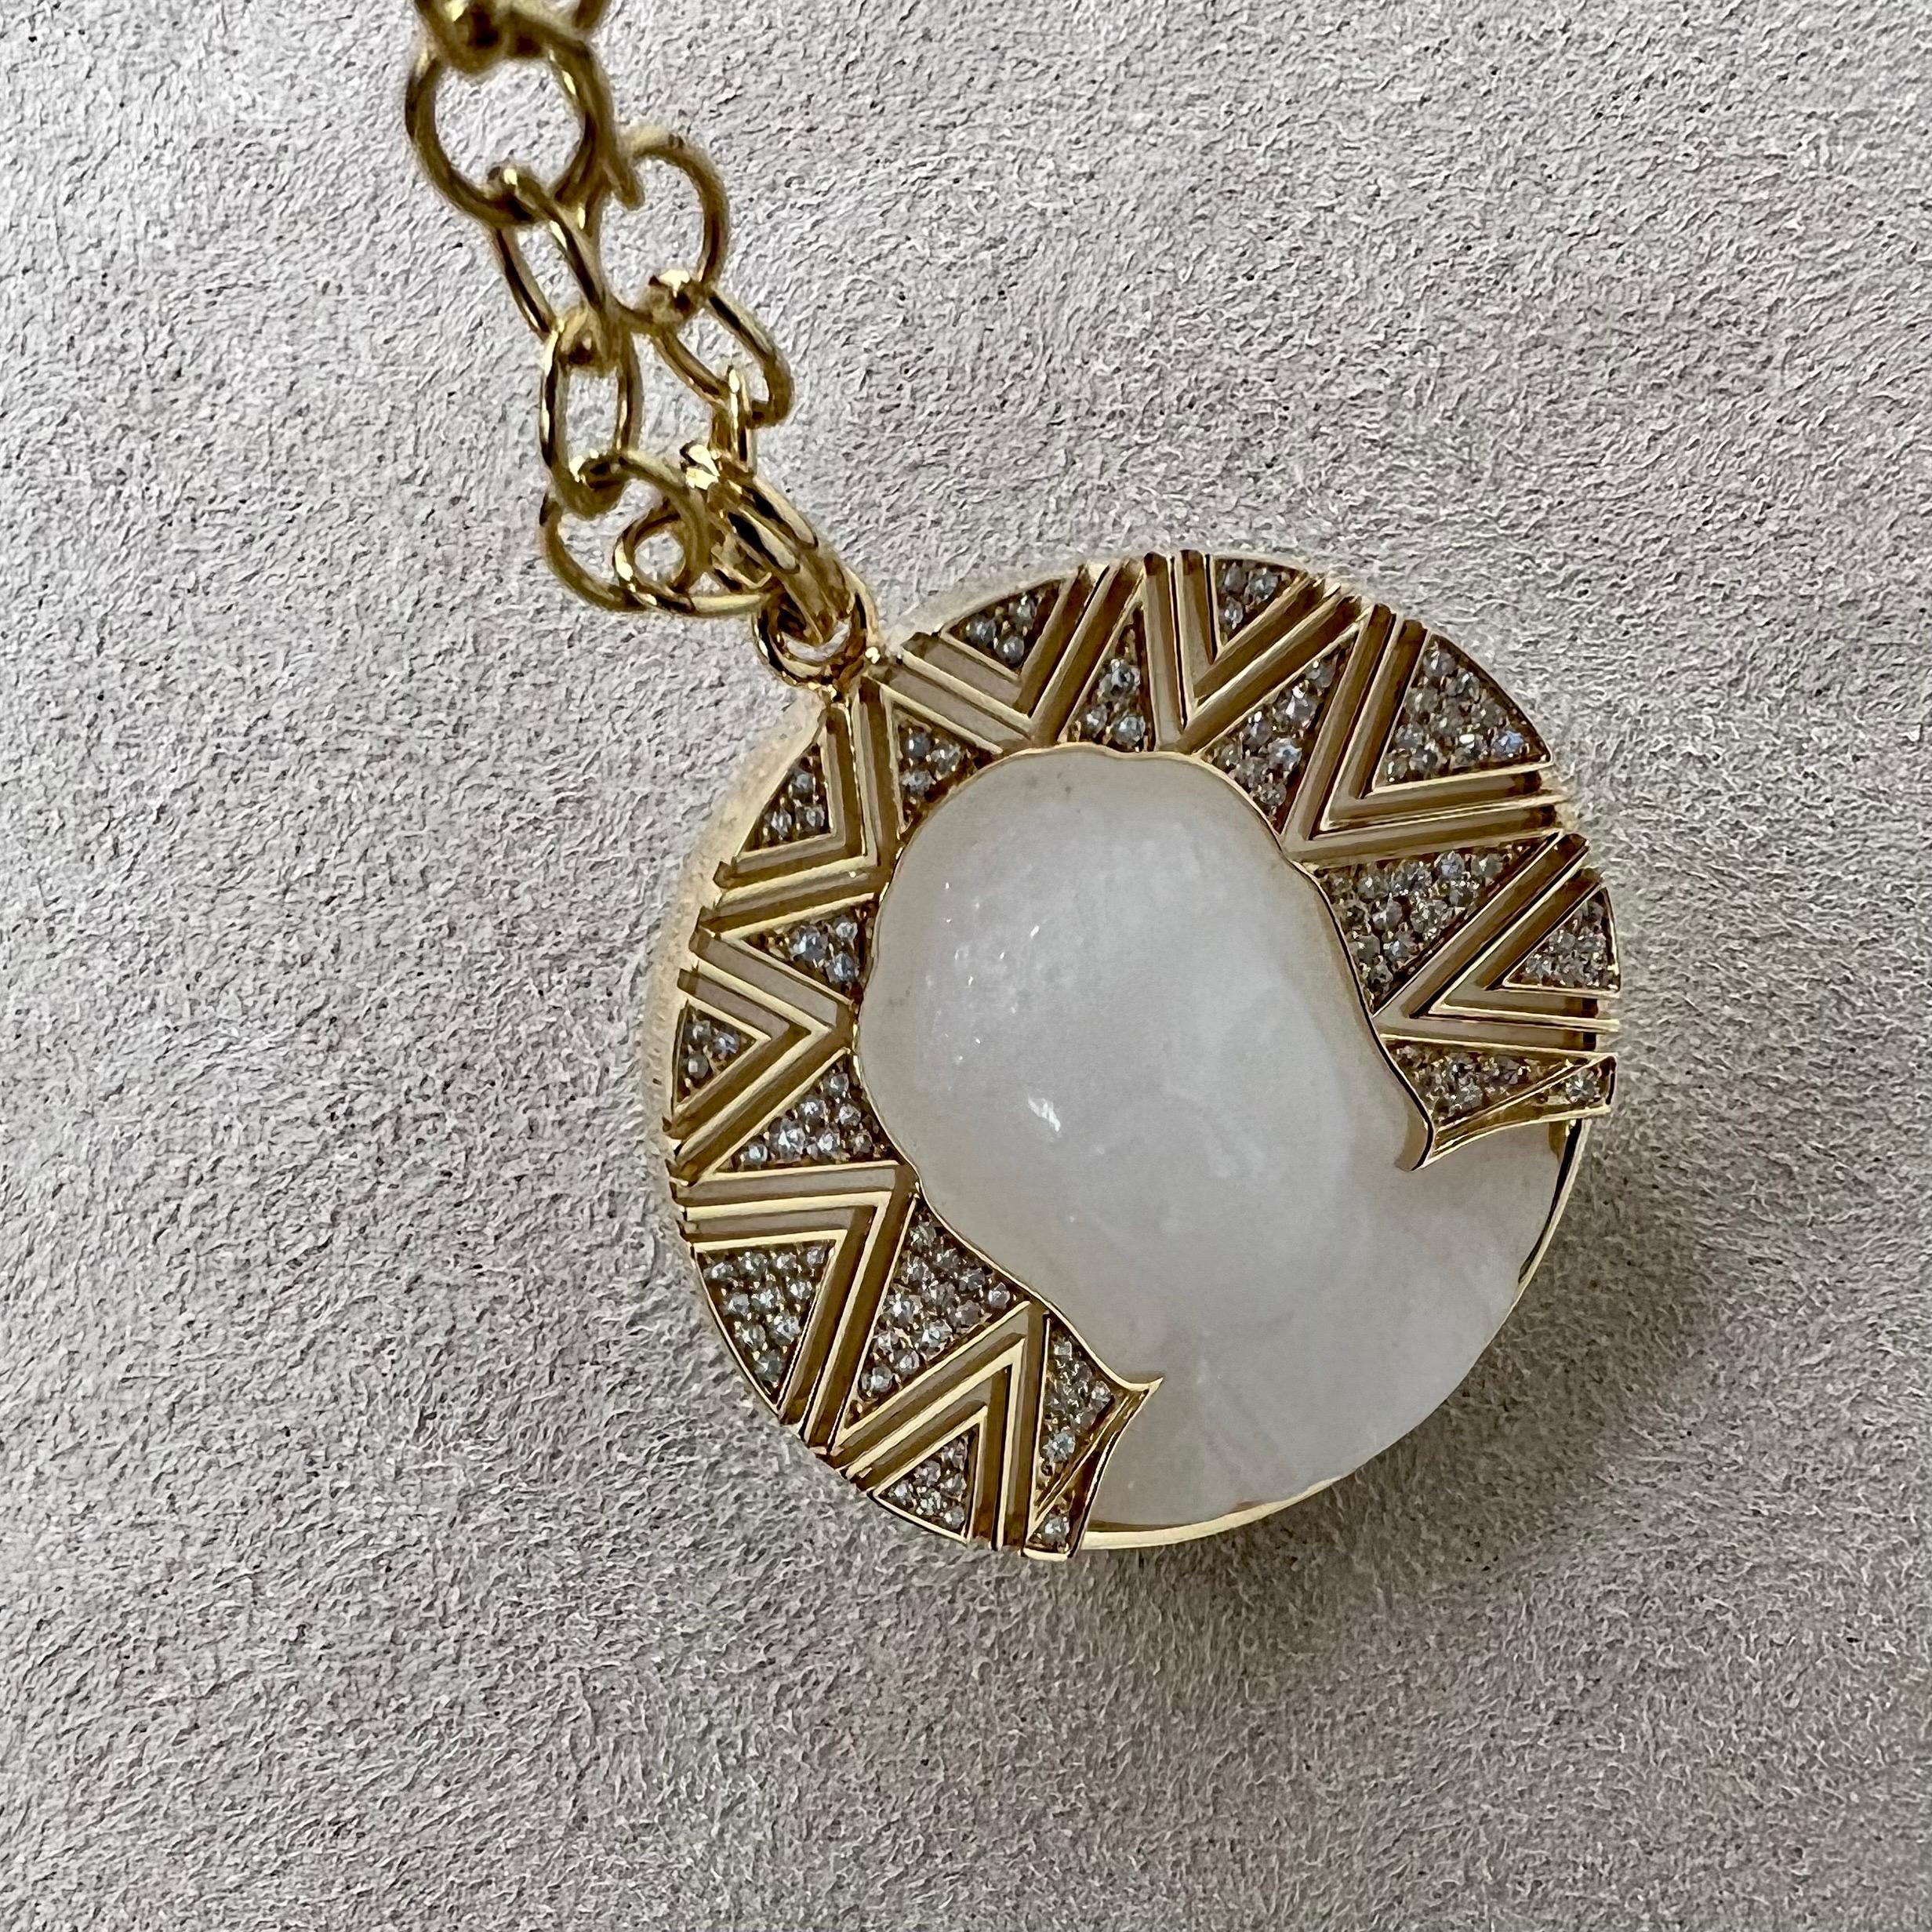 Created in 18 karat yellow gold
White agate 58 carats approx.
Diamonds 0.75 carat approx.
Chain sold separately 

Exquisitely crafted from 18-karat yellow gold, this Agate Buddha Pendant is a captivating masterpiece. Magnificently bejeweled with a